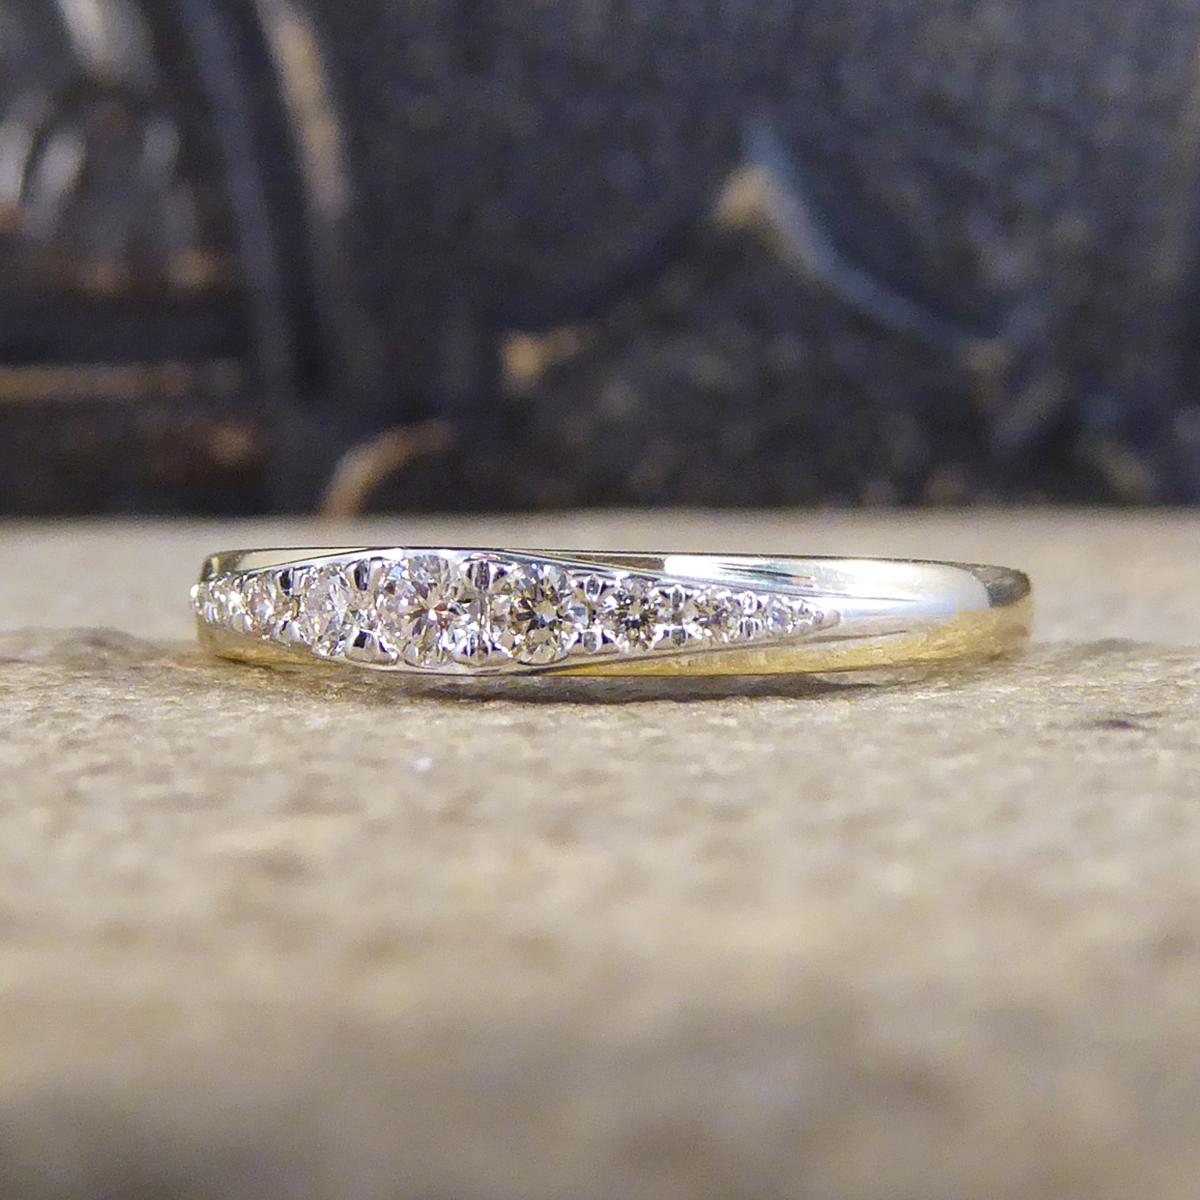 This ring is new and never worn, it is set with 9 Diamonds in a claw setting, graduating from the smallest on the outside leading to meet in the middle being the largest stone. Such a lovely little ring that shows great quality in the stones in a